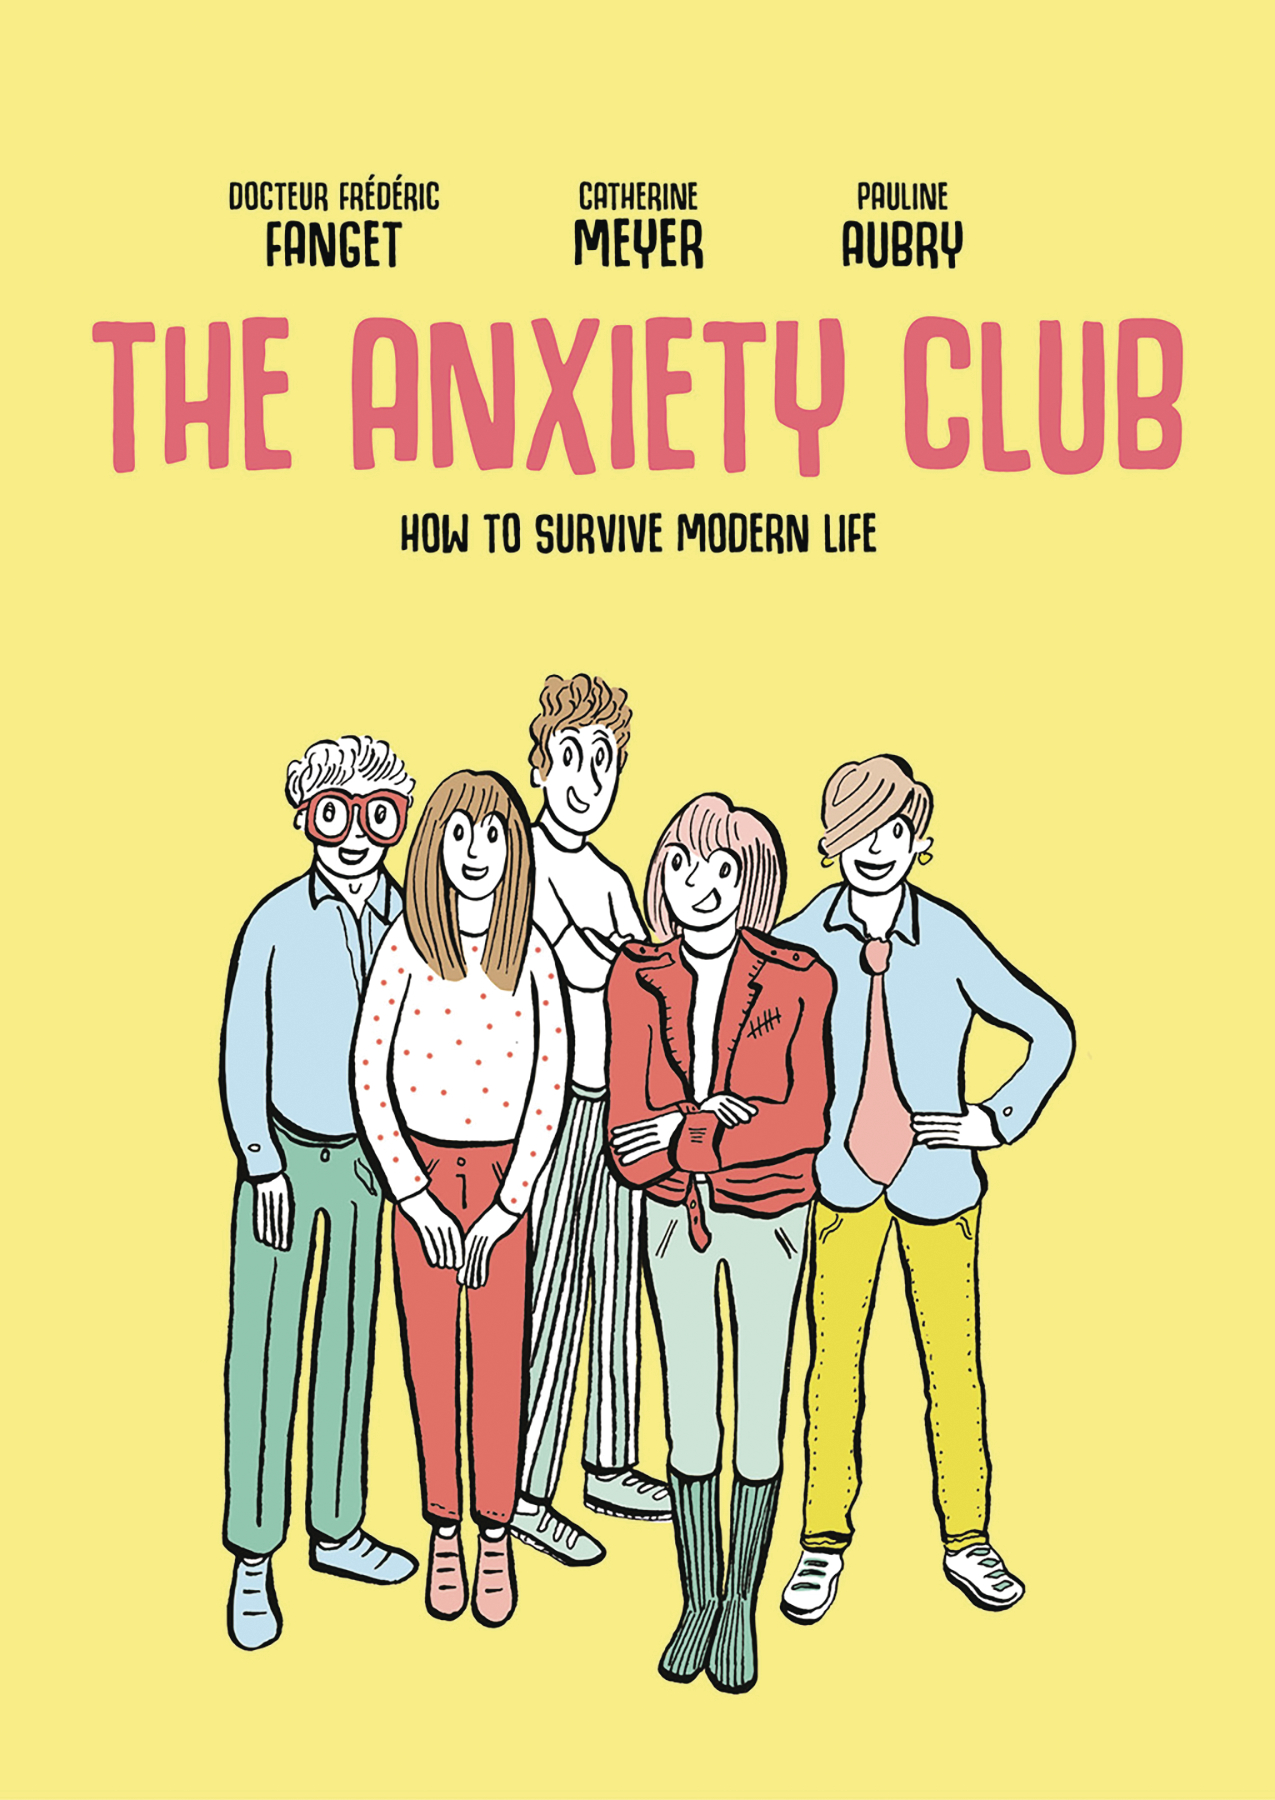 Anxiety Club How To Survive Modern Life Soft Cover